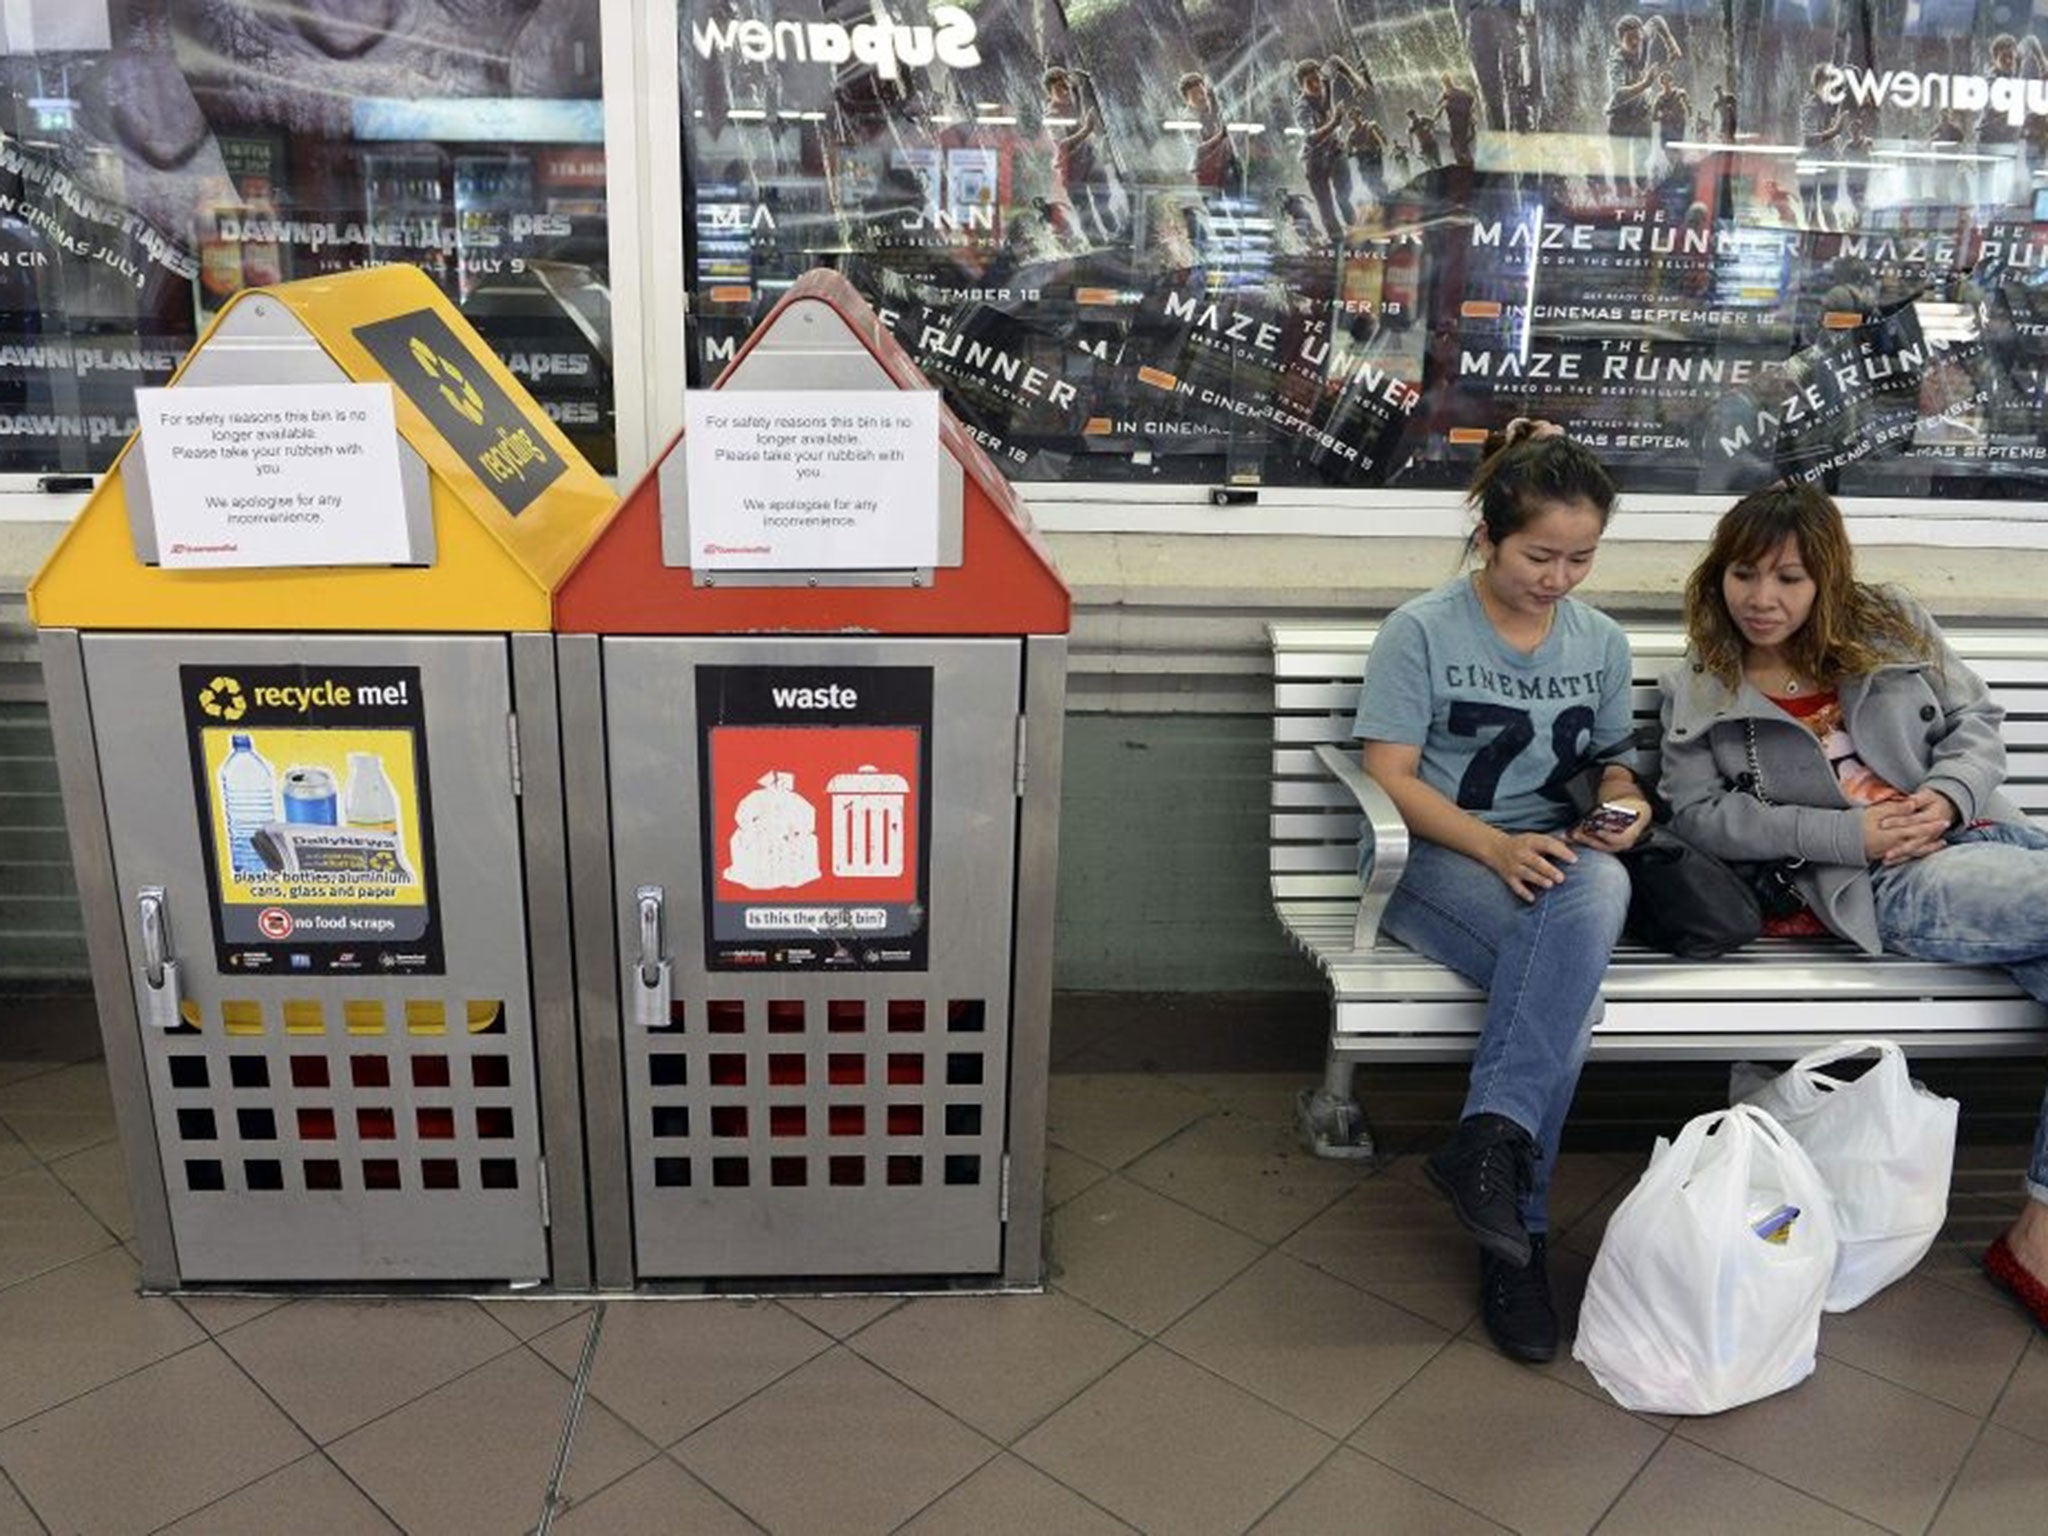 Rubbish bins are blocked with warning messages about public safety at Central rail station in Brisbane